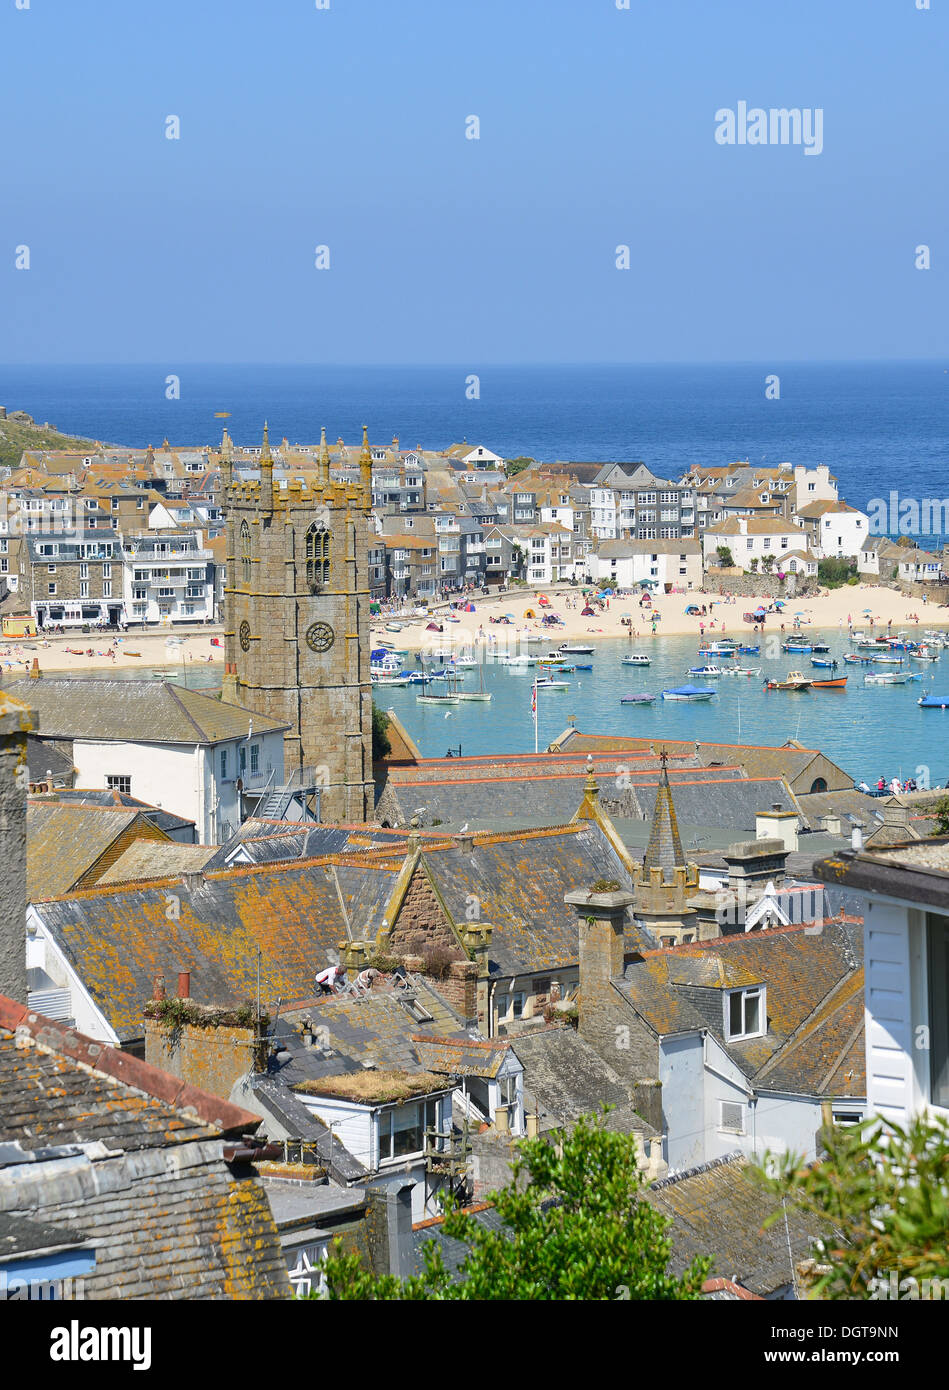 St Ives Harbour, St Ives, Cornwall, Angleterre, Royaume-Uni Banque D'Images